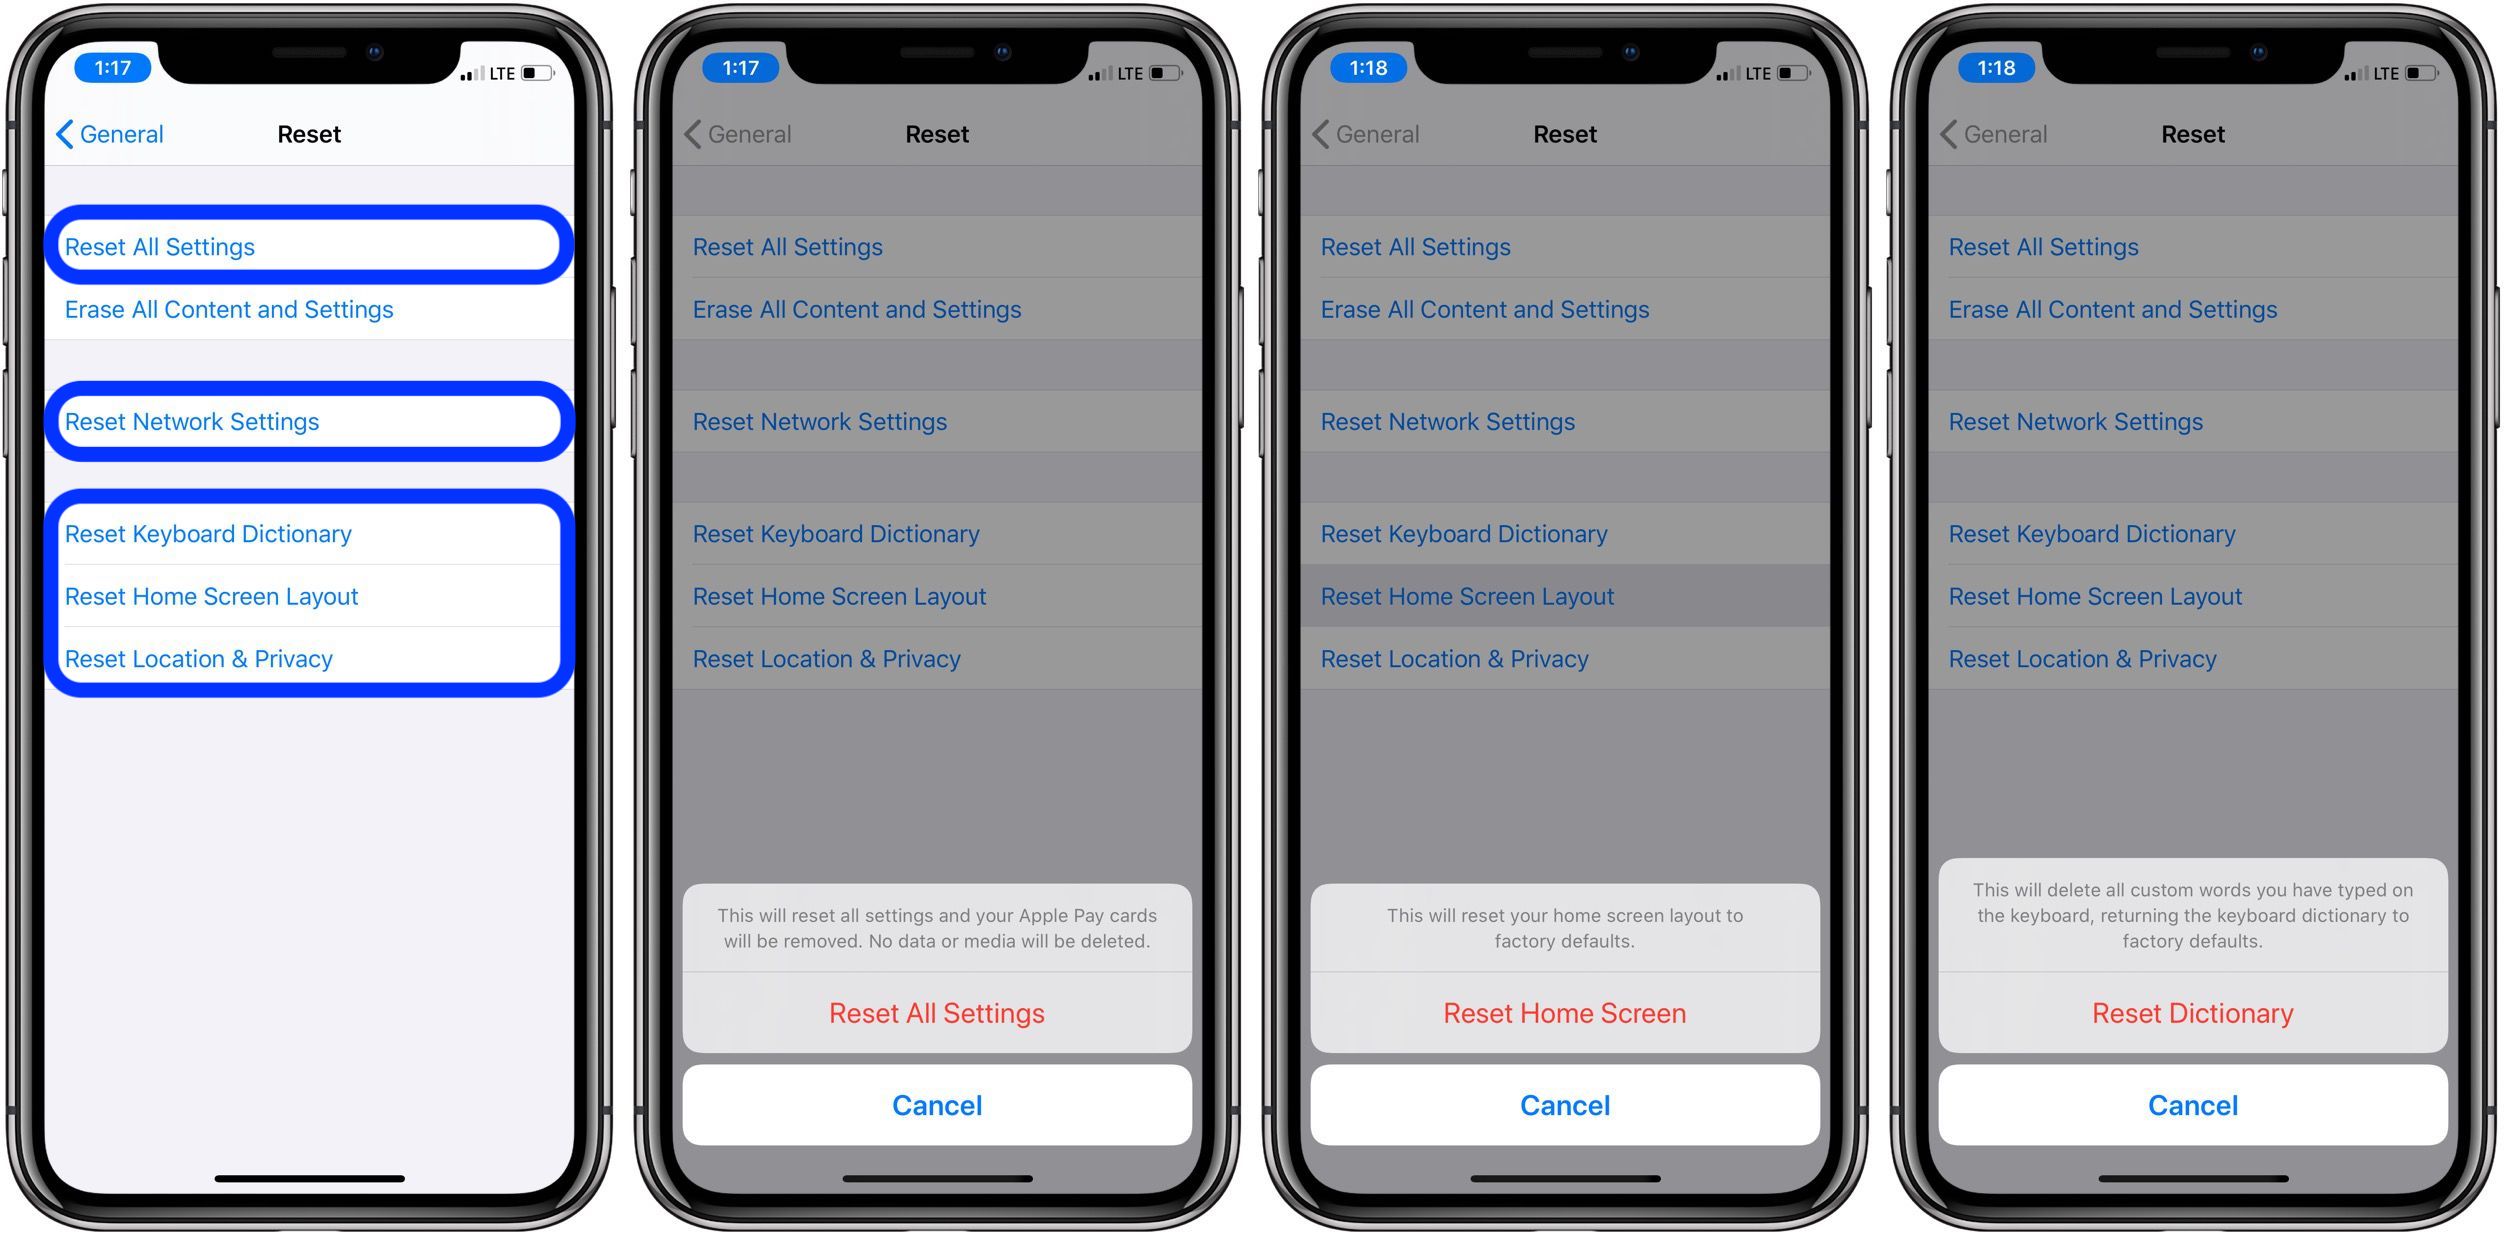 How to restore default iPhone settings without erasing your data - 9to5Mac